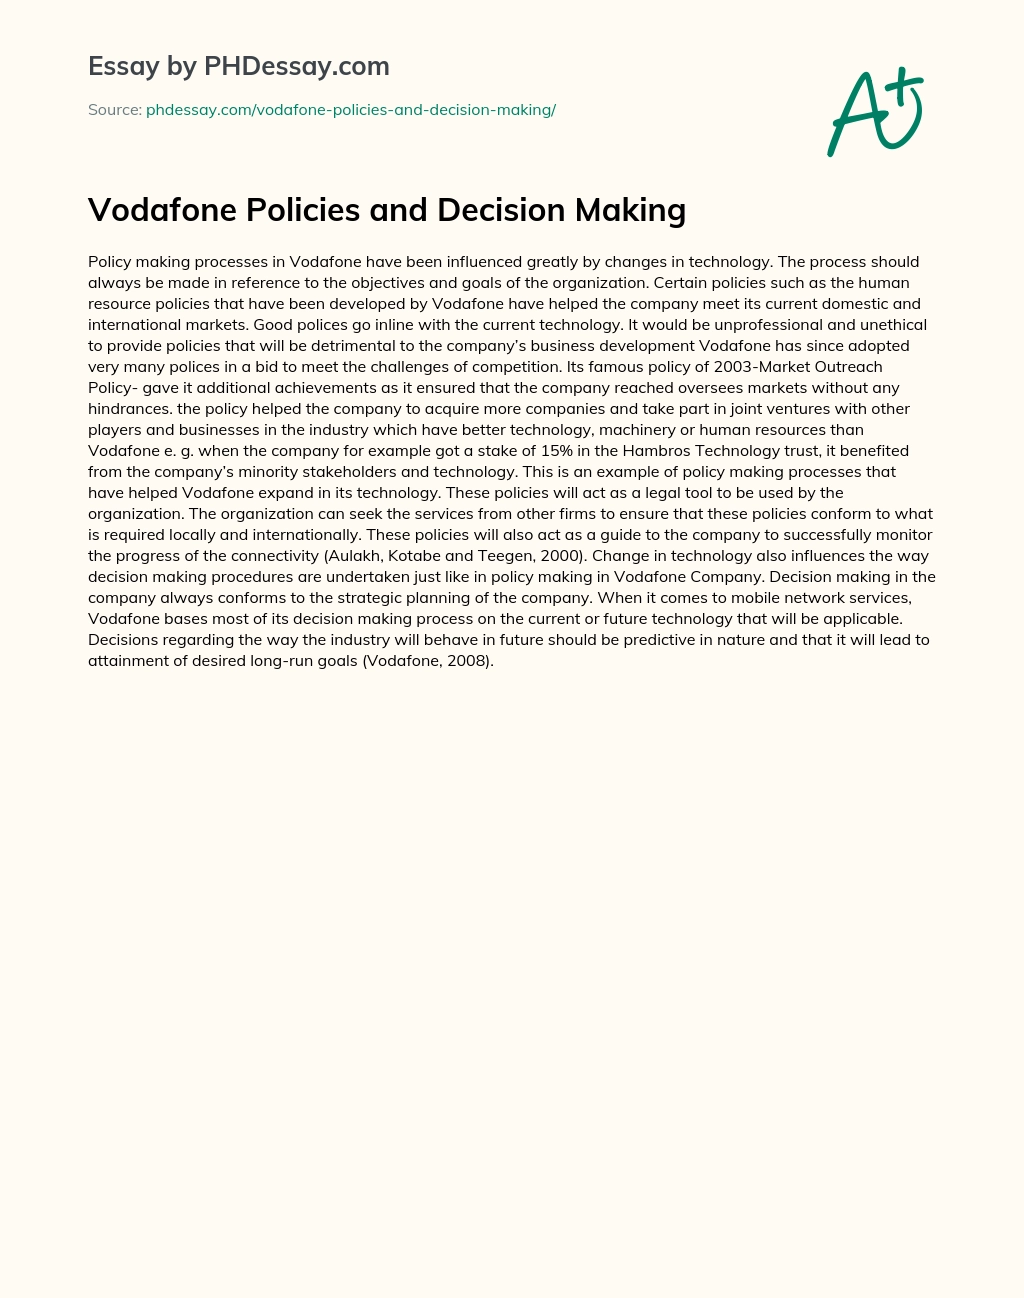 Vodafone Policies and Decision Making essay